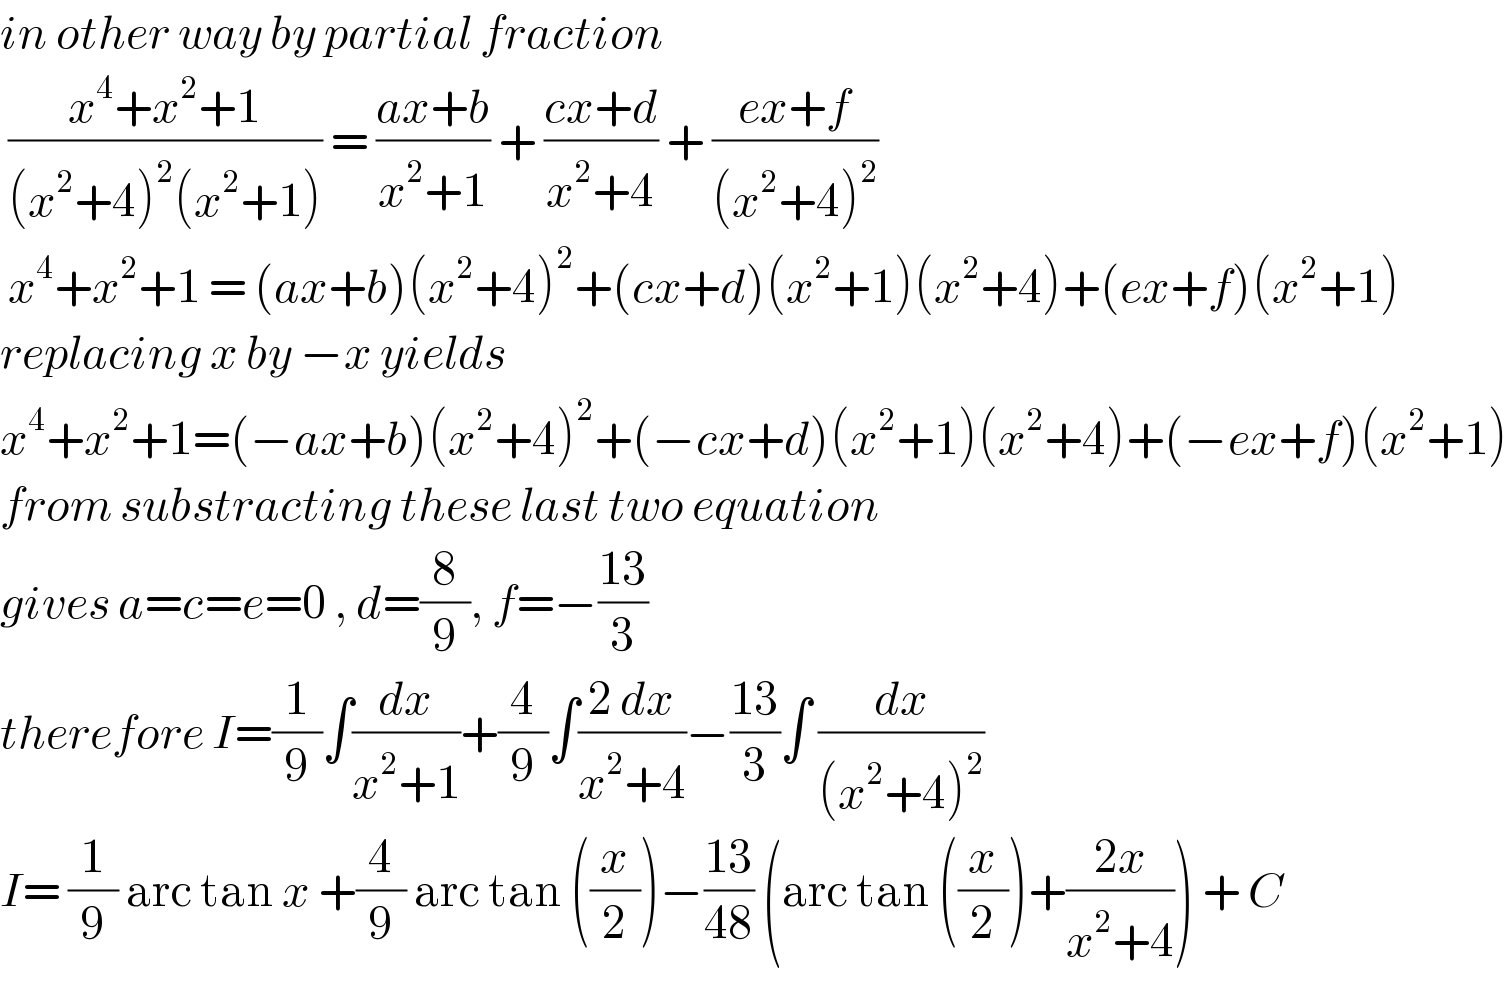 in other way by partial fraction   ((x^4 +x^2 +1)/((x^2 +4)^2 (x^2 +1))) = ((ax+b)/(x^2 +1)) + ((cx+d)/(x^2 +4)) + ((ex+f)/((x^2 +4)^2 ))   x^4 +x^2 +1 = (ax+b)(x^2 +4)^2 +(cx+d)(x^2 +1)(x^2 +4)+(ex+f)(x^2 +1)  replacing x by −x yields  x^4 +x^2 +1=(−ax+b)(x^2 +4)^2 +(−cx+d)(x^2 +1)(x^2 +4)+(−ex+f)(x^2 +1)  from substracting these last two equation  gives a=c=e=0 , d=(8/9), f=−((13)/3)  therefore I=(1/9)∫(dx/(x^2 +1))+(4/9)∫((2 dx)/(x^2 +4))−((13)/3)∫ (dx/((x^2 +4)^2 ))  I= (1/9) arc tan x +(4/9) arc tan ((x/2))−((13)/(48)) (arc tan ((x/2))+((2x)/(x^2 +4))) + C  